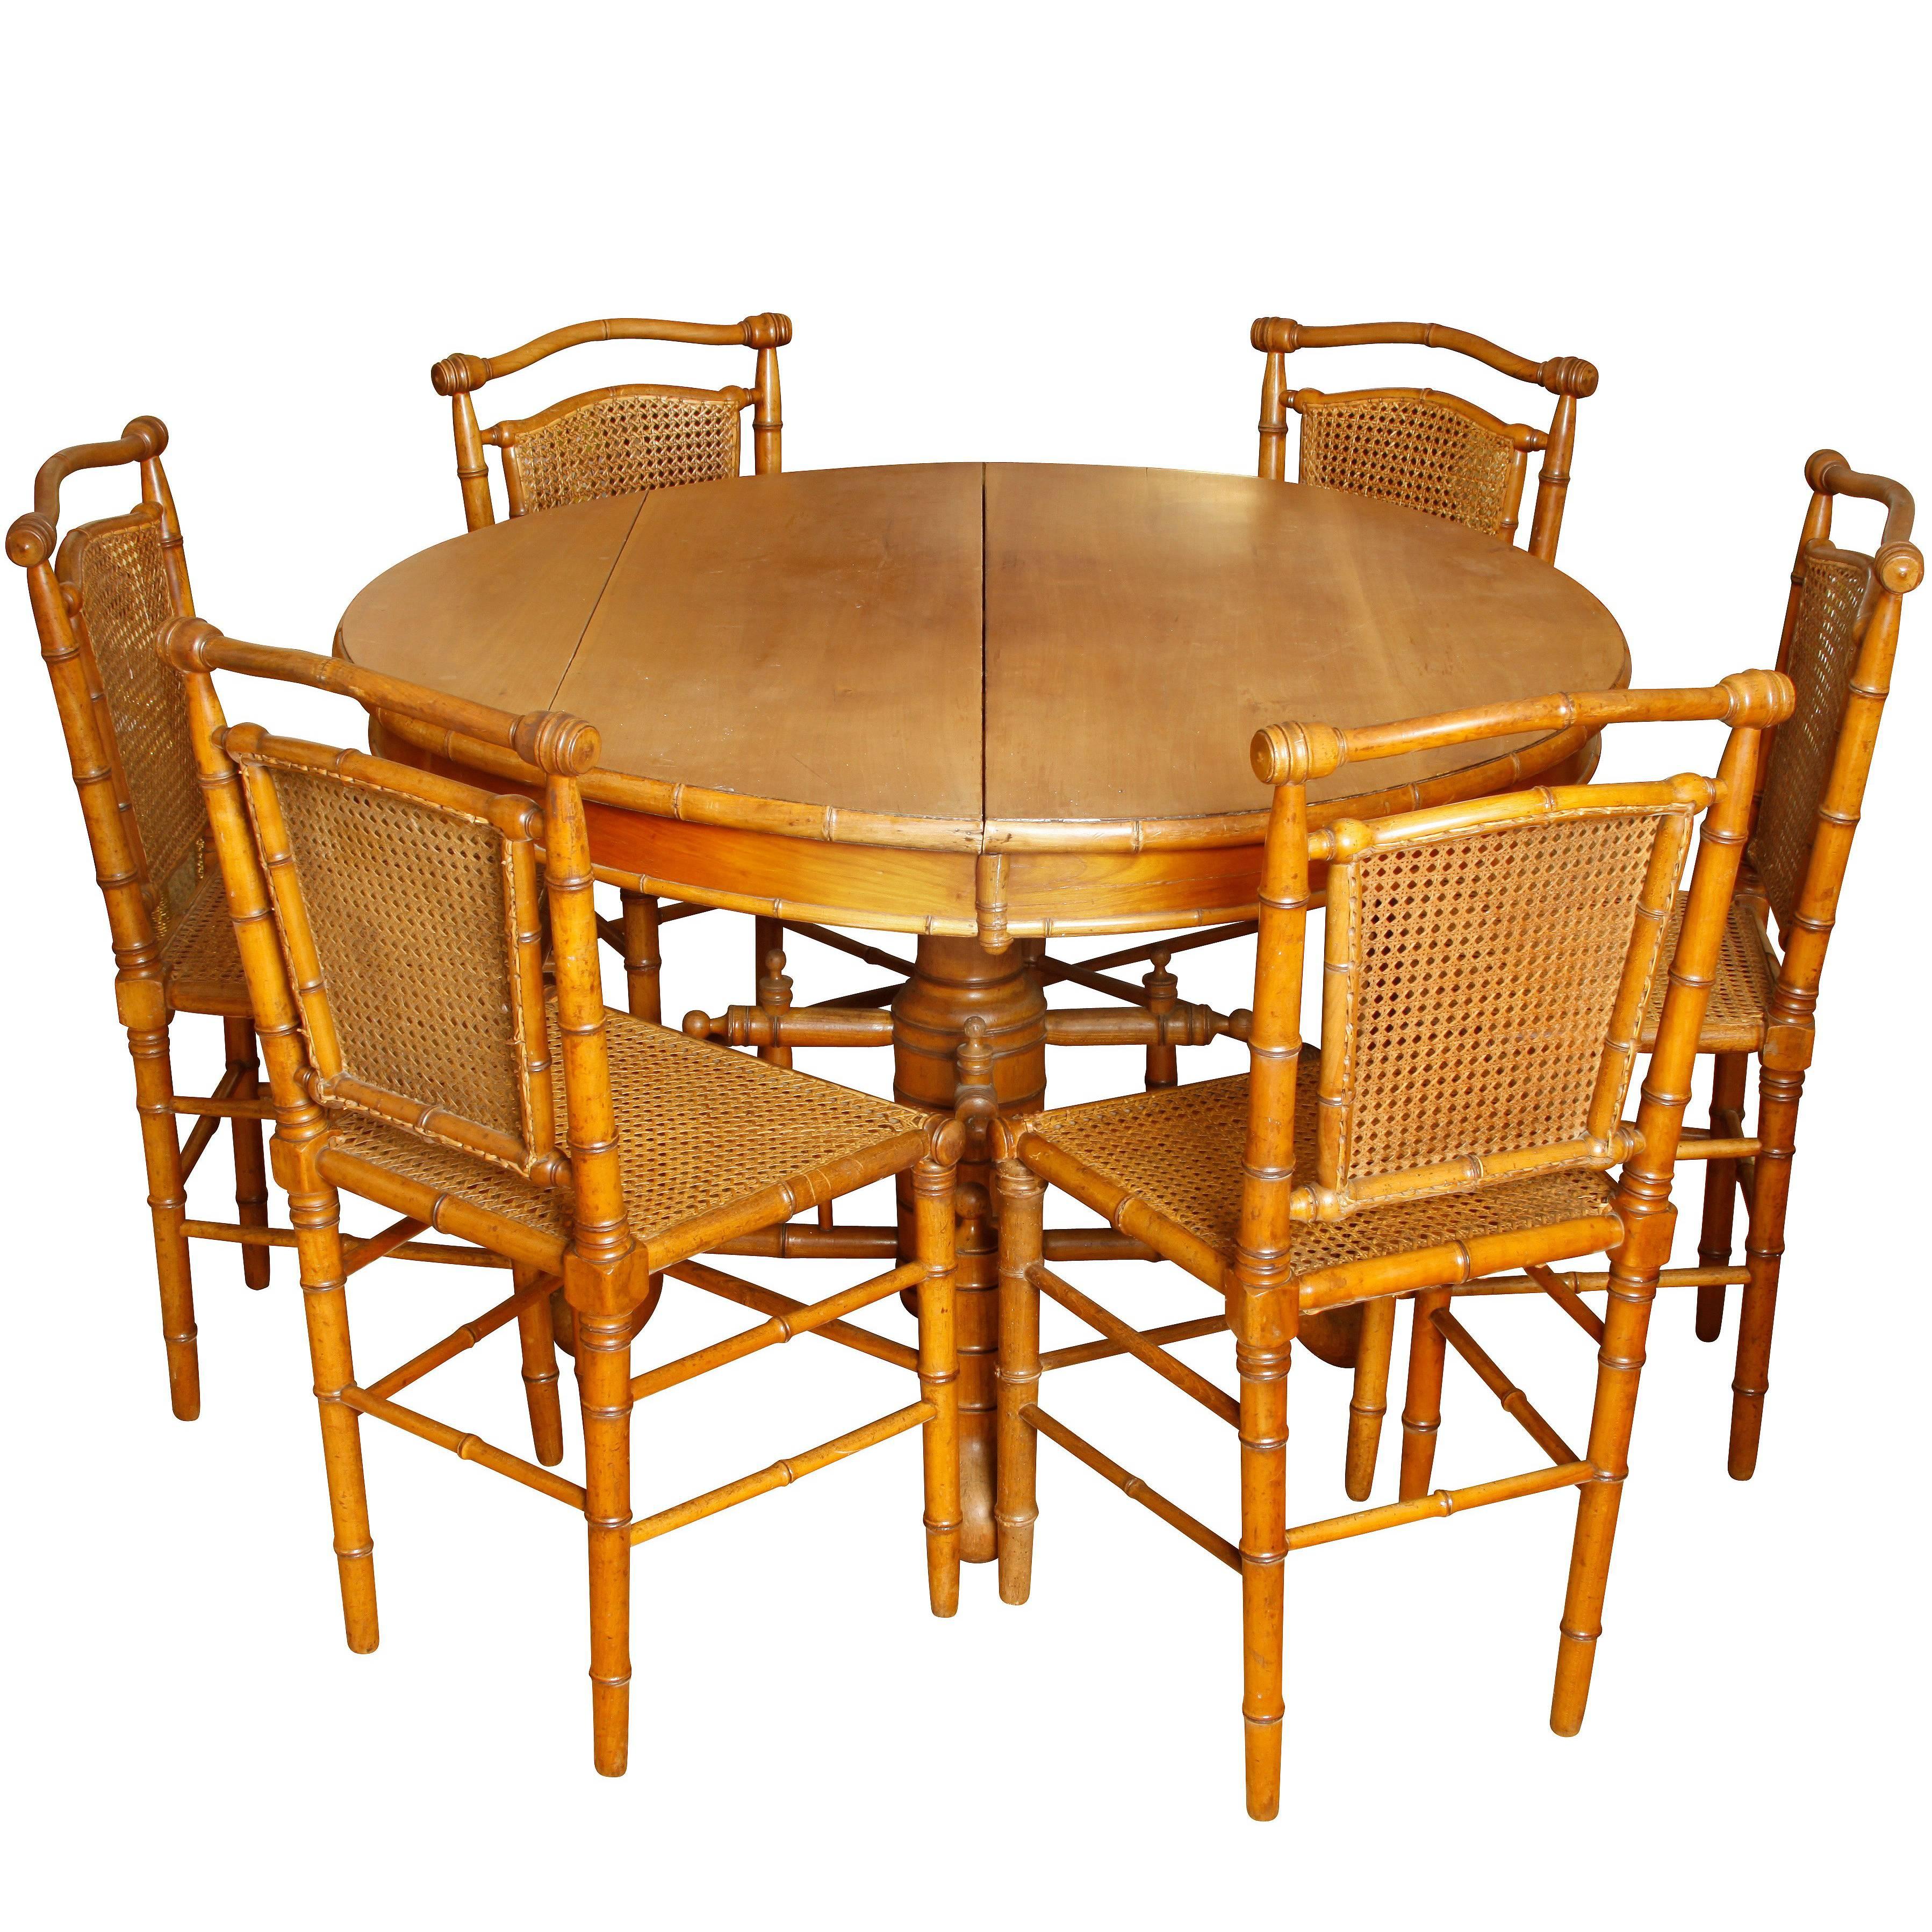 Antique English Carved Bamboo Table and Six Chairs